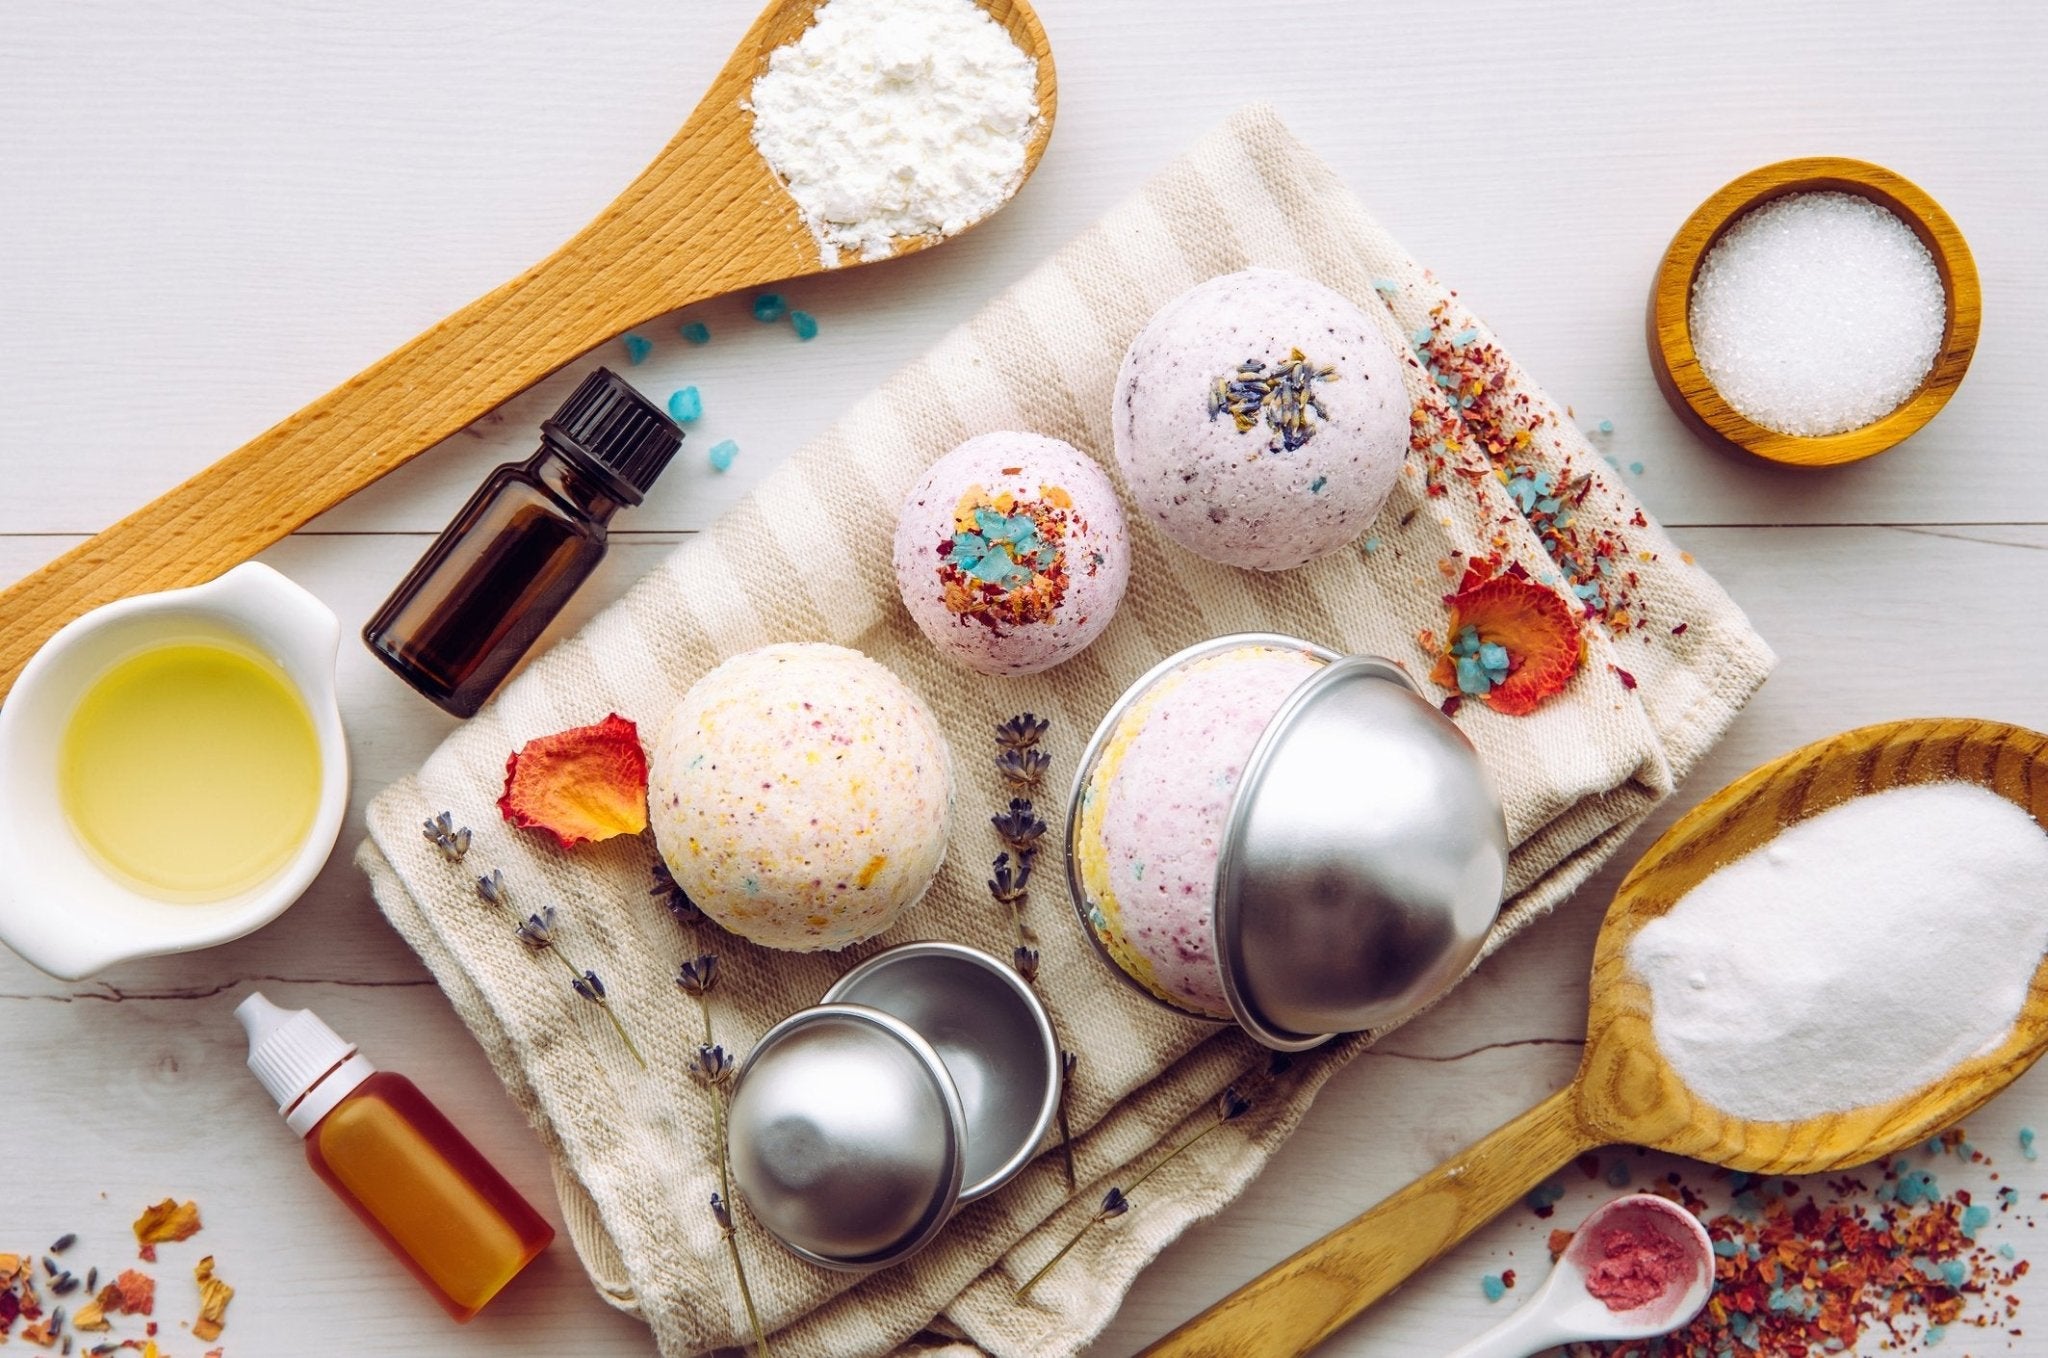 How To Make Bath Bombs - Top Questions Answered